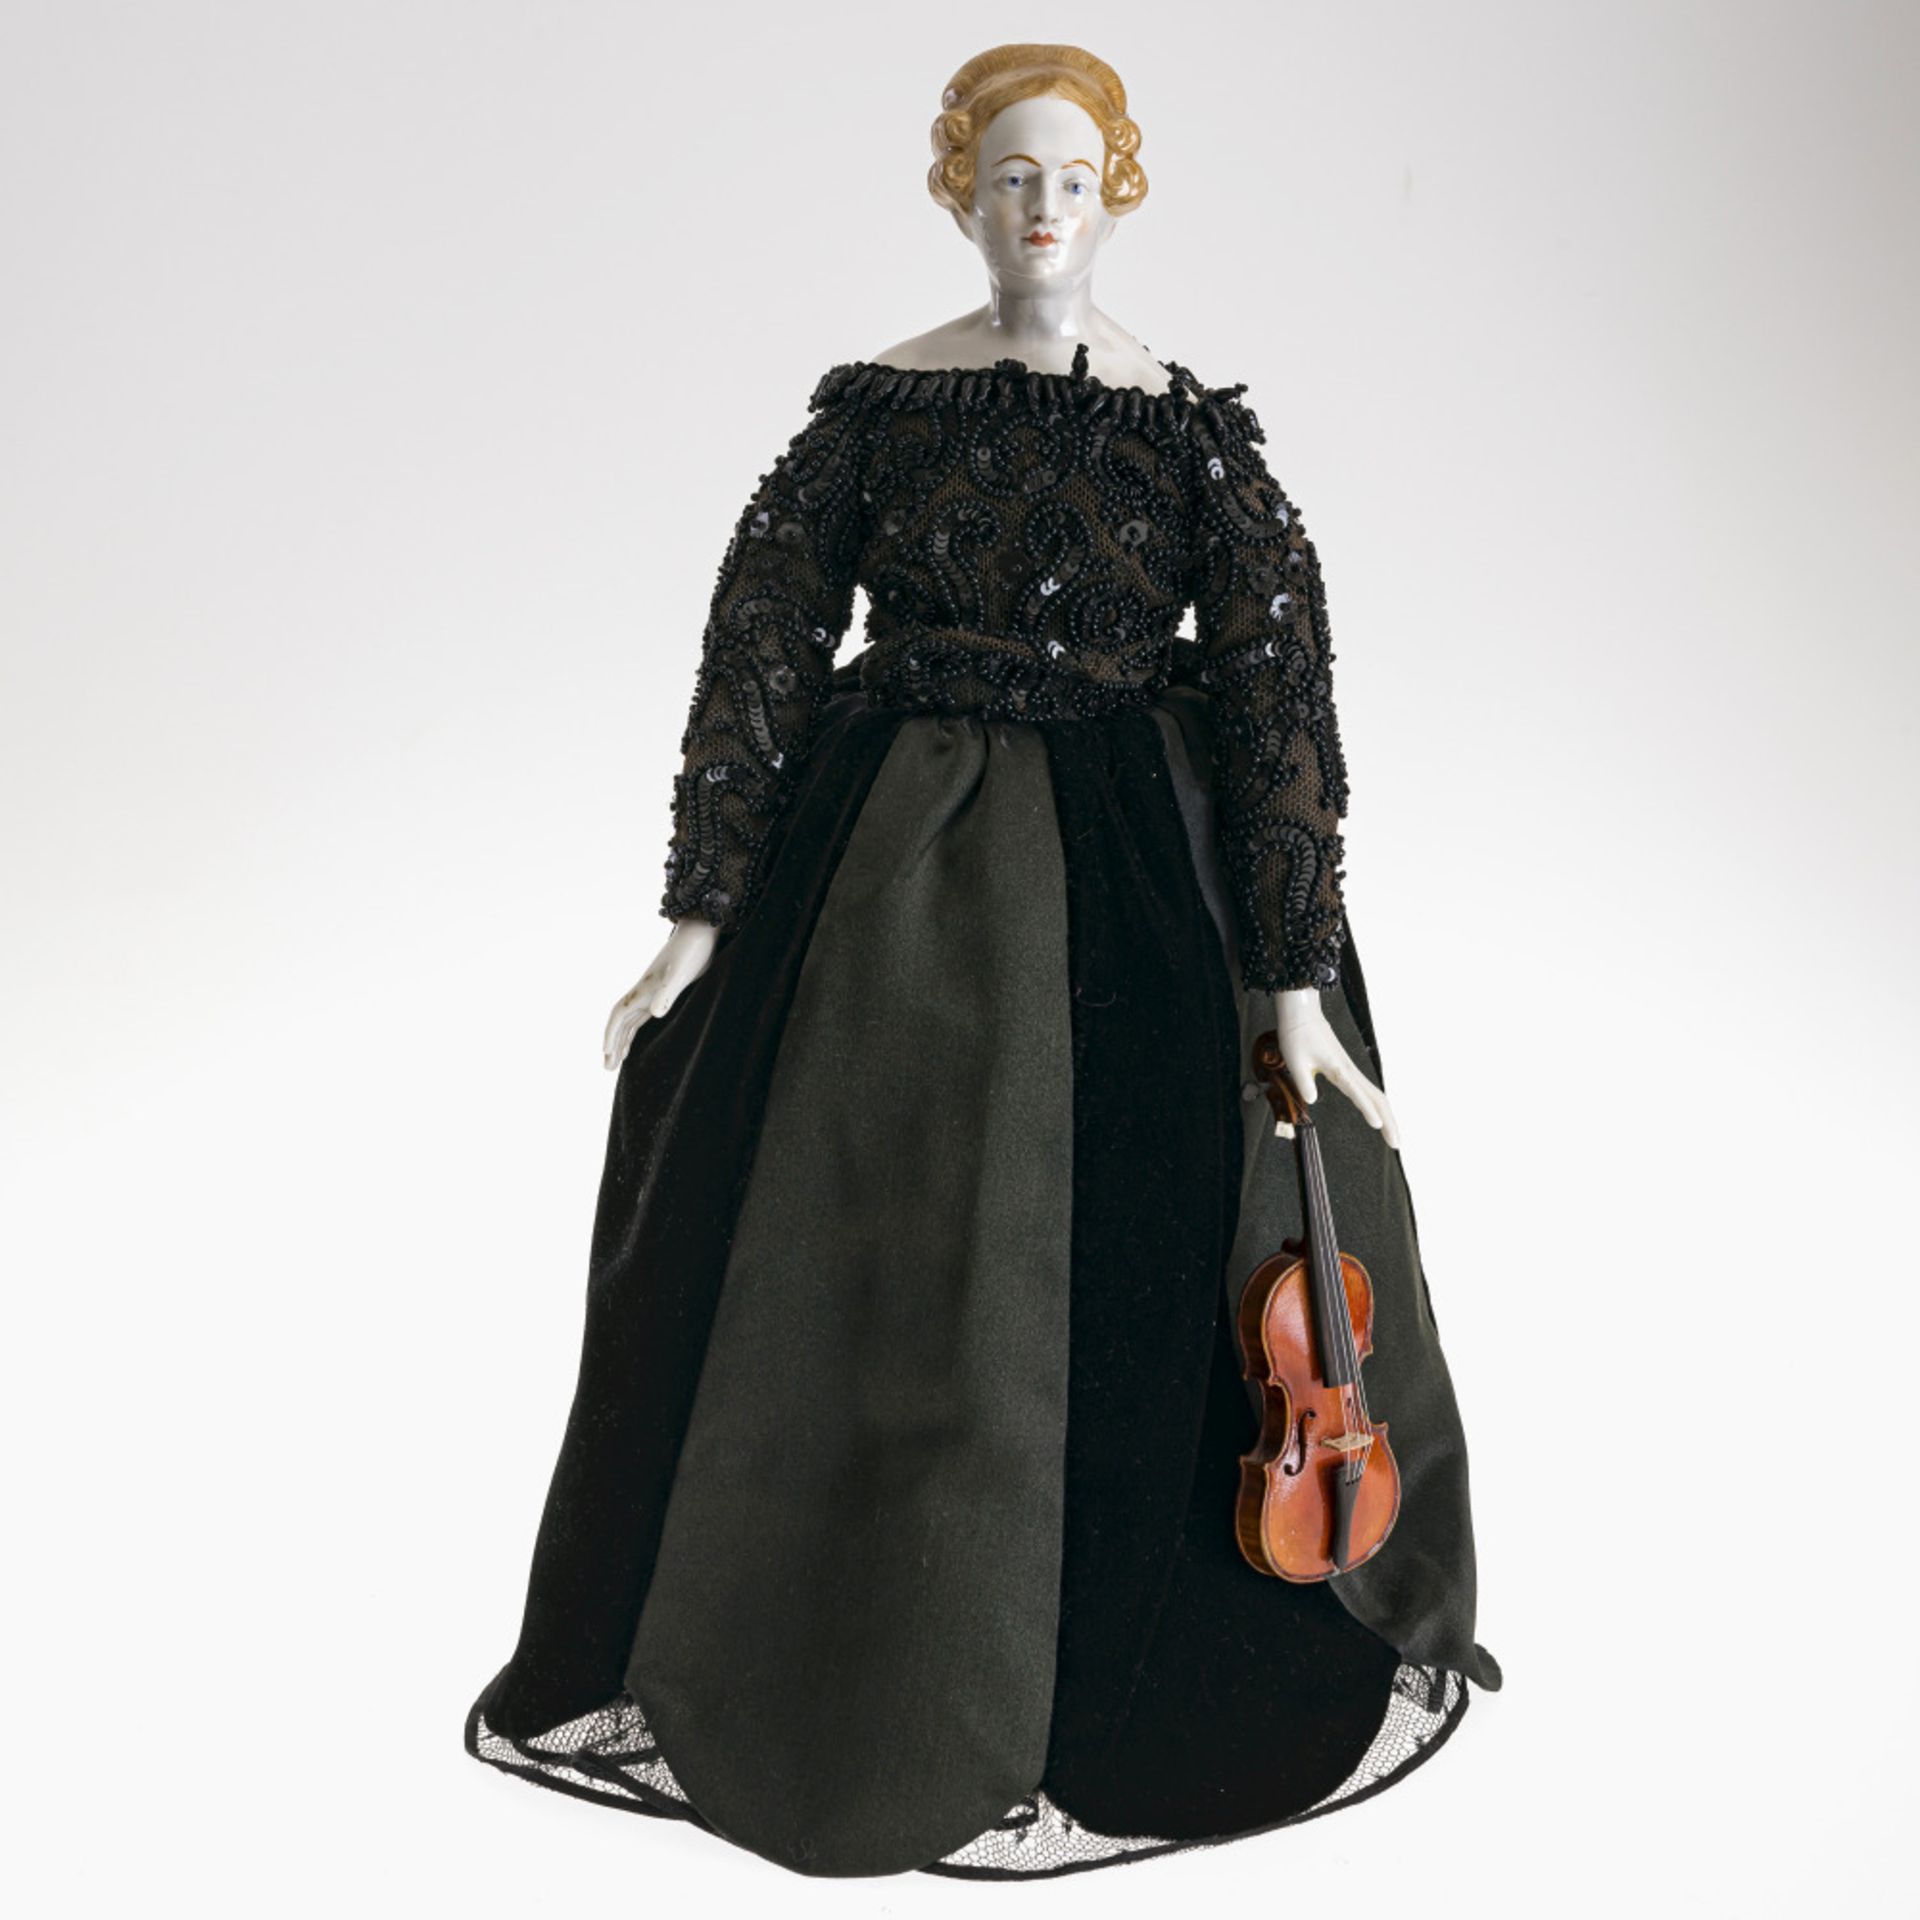 A doll (violinist) in ESCADA dress - Head, arms and legs from Nymphenburg, as of 1997. Later formati - Image 3 of 3